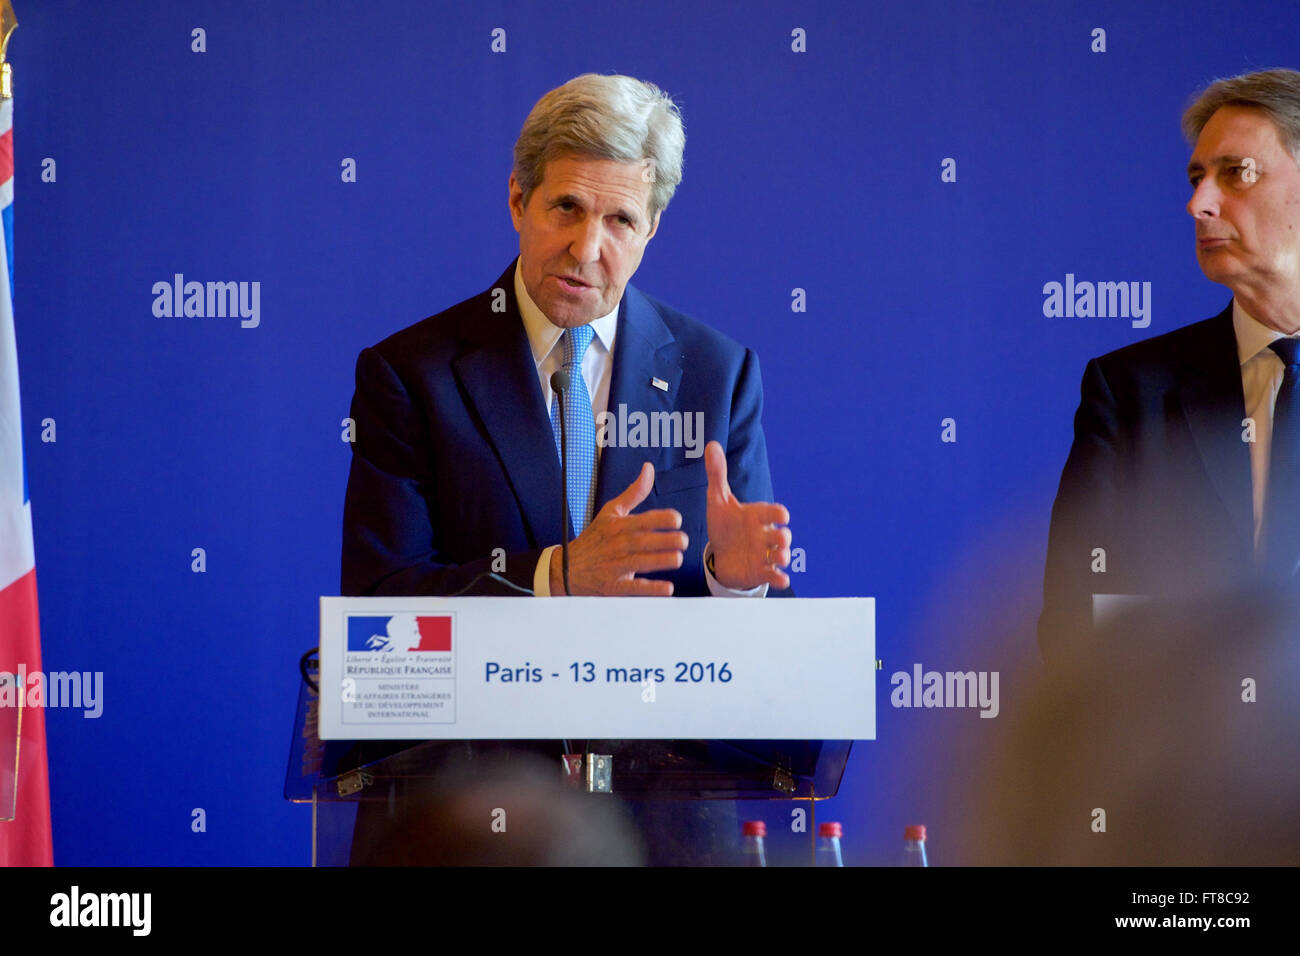 British Foreign Secretary Philip Hammond looks on as U.S. Secretary of State John Kerry addresses reporters on March 13, 2015, at the Quai d'Orsay in Paris, France, after they held an E4+1 meeting - including representatives of France, Germany, Italy, the United Kingdom, and European Union - focused on Syria, Libya, Yemen, Ukraine, and other foreign policy matters. [State Department Photo/Public Domain] Stock Photo